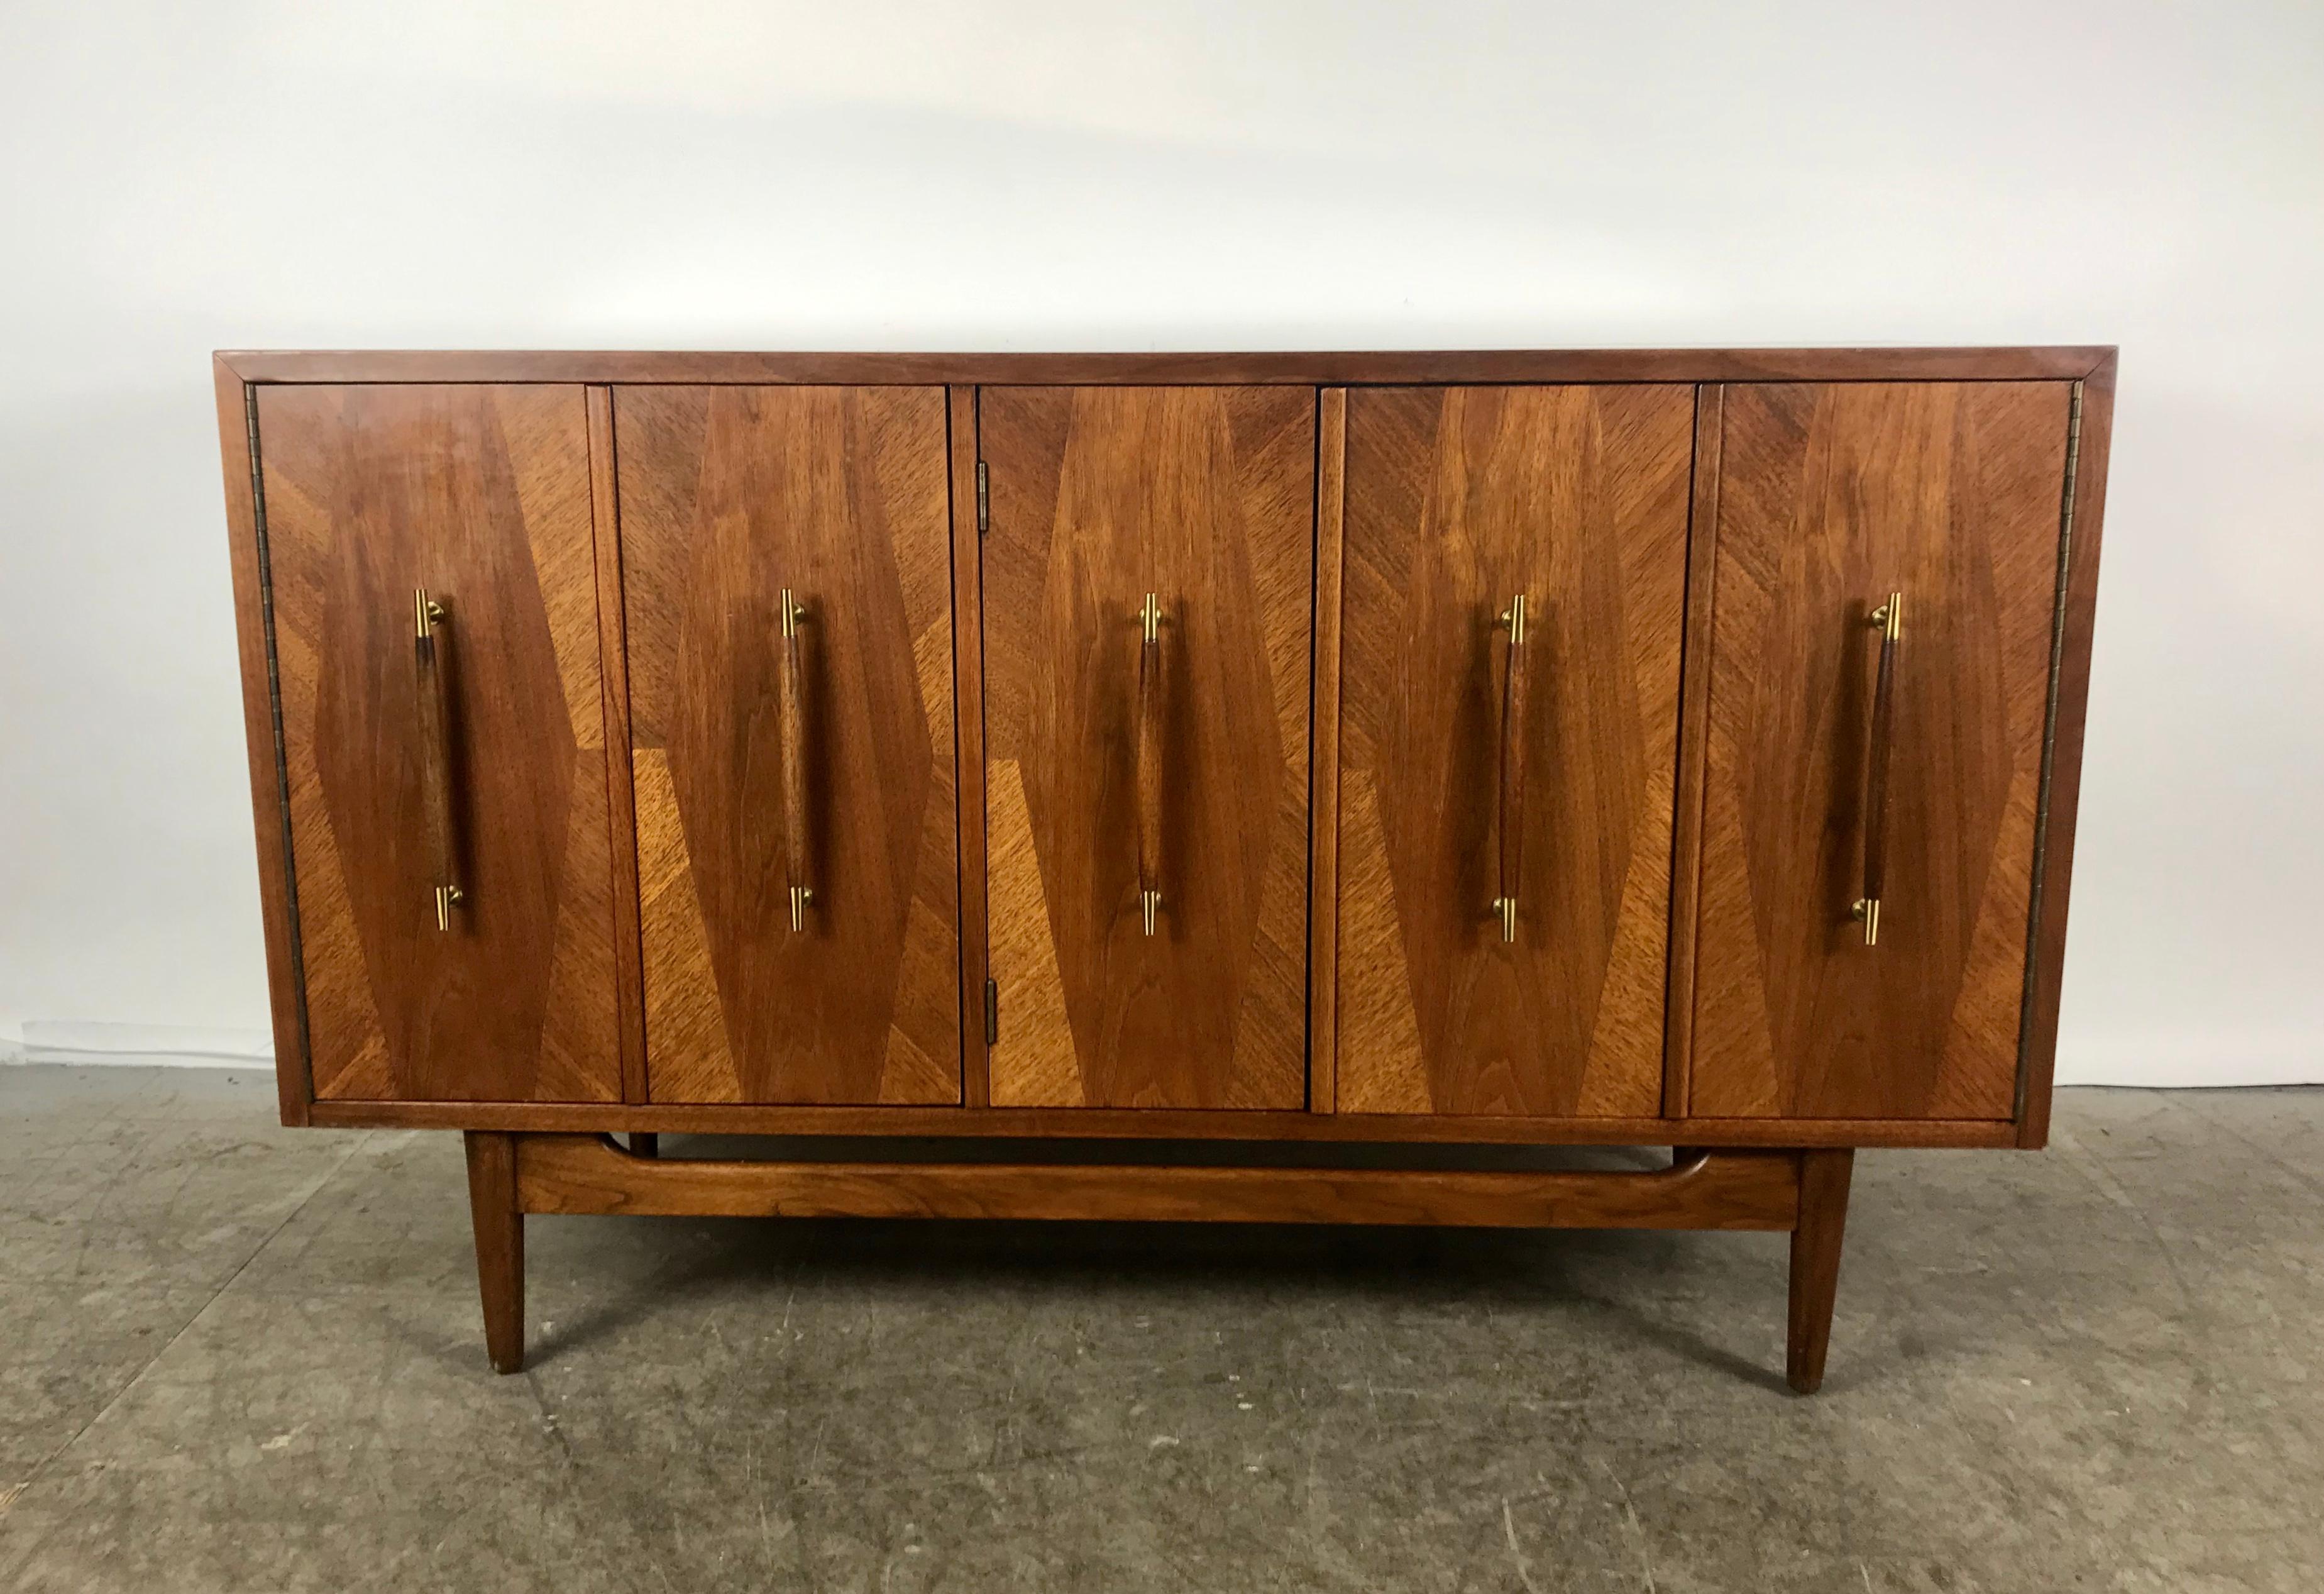 Stunning modernist walnut cabinet or server. Dramatic wood veneers, walnut and brass hand pulls. American of Martinsville, Designed by Merton Gershun from the 'Dania